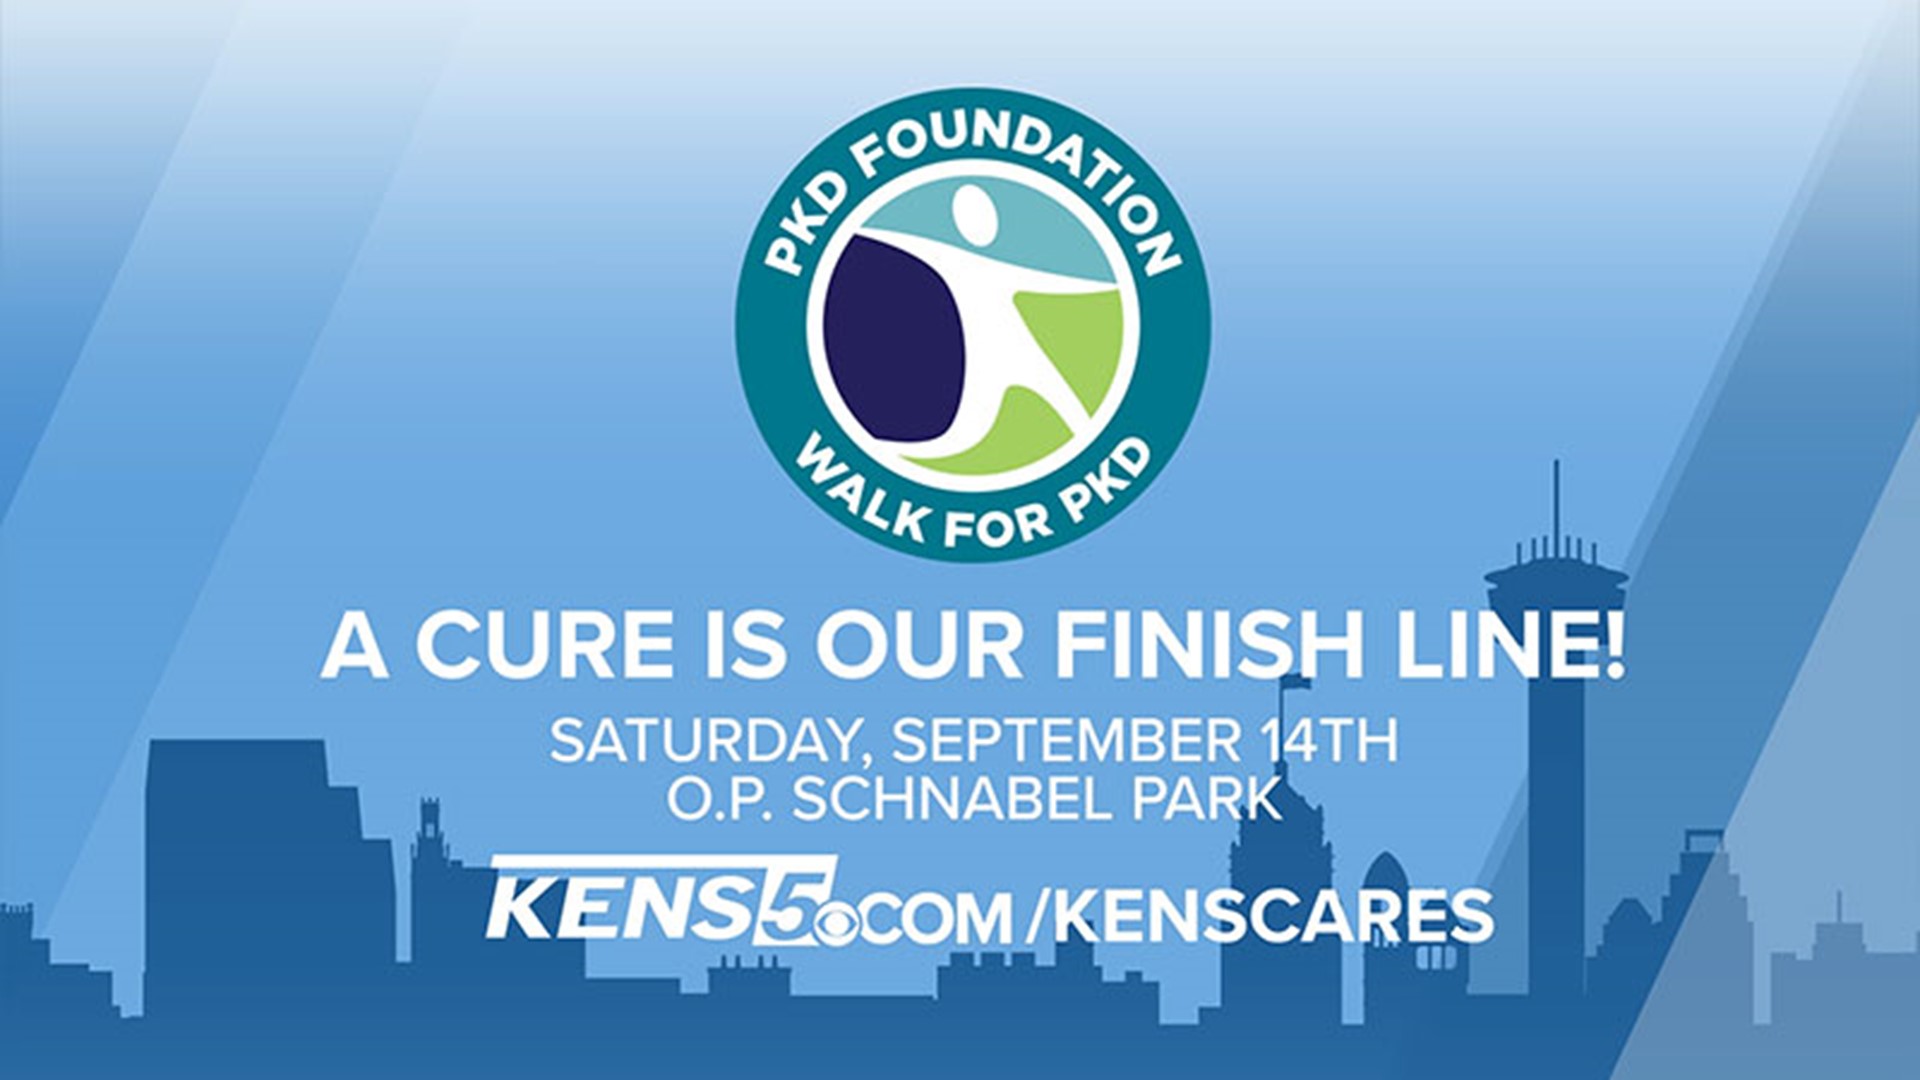 The San Antonio Walk for PKD is your chance to take a small step and make a big difference in the lives of those who have polycystic kidney disease.